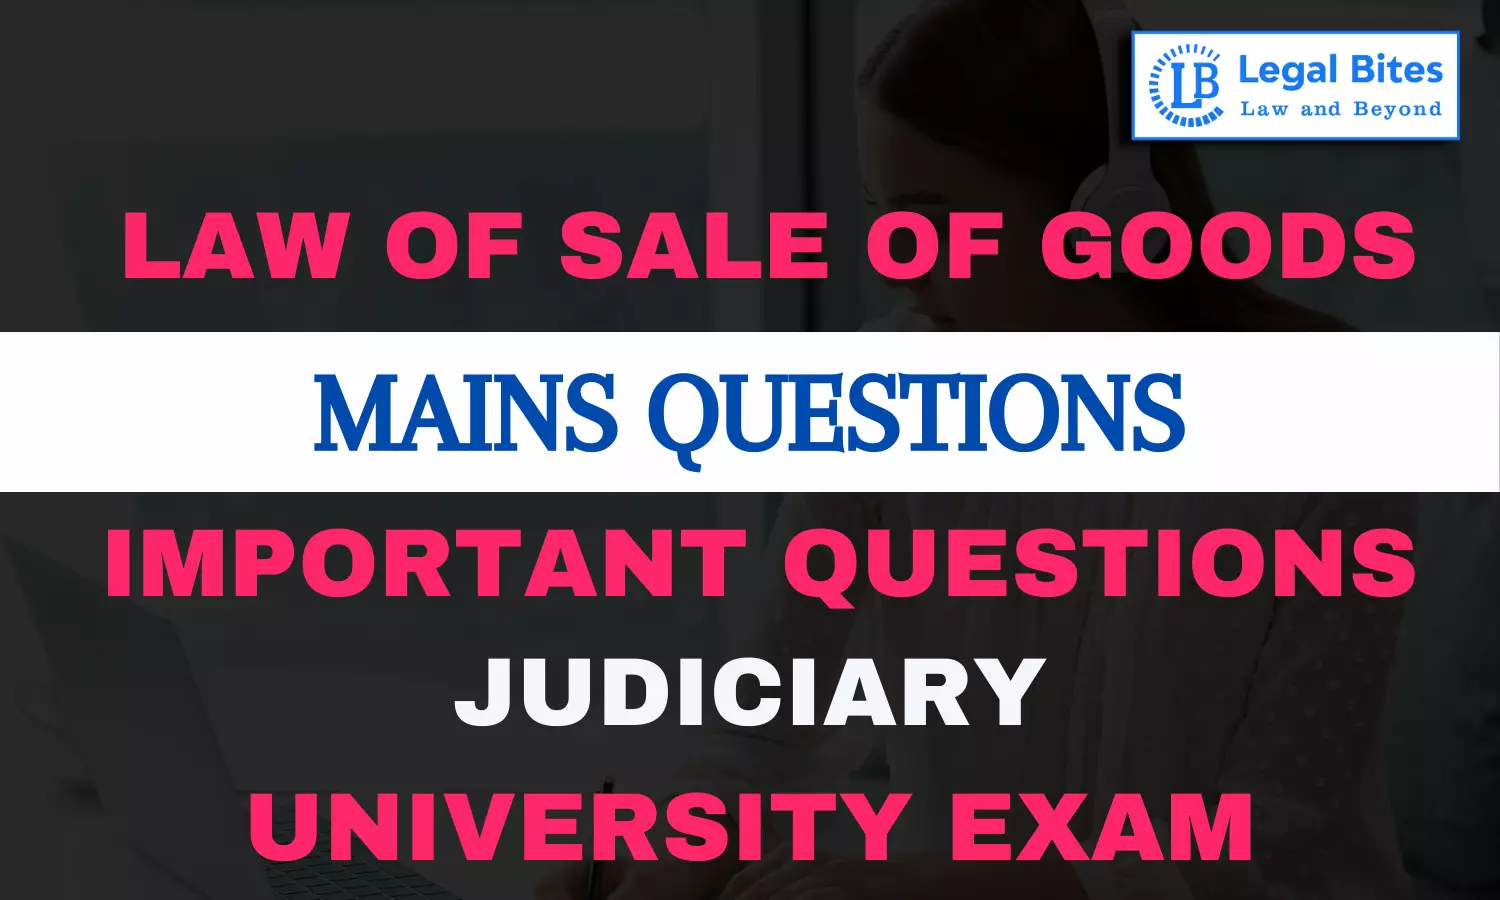 Has the original seller any right of stoppage in transit? Give answer with reference to section (s) of the Sale of Goods Act and case law, if any.